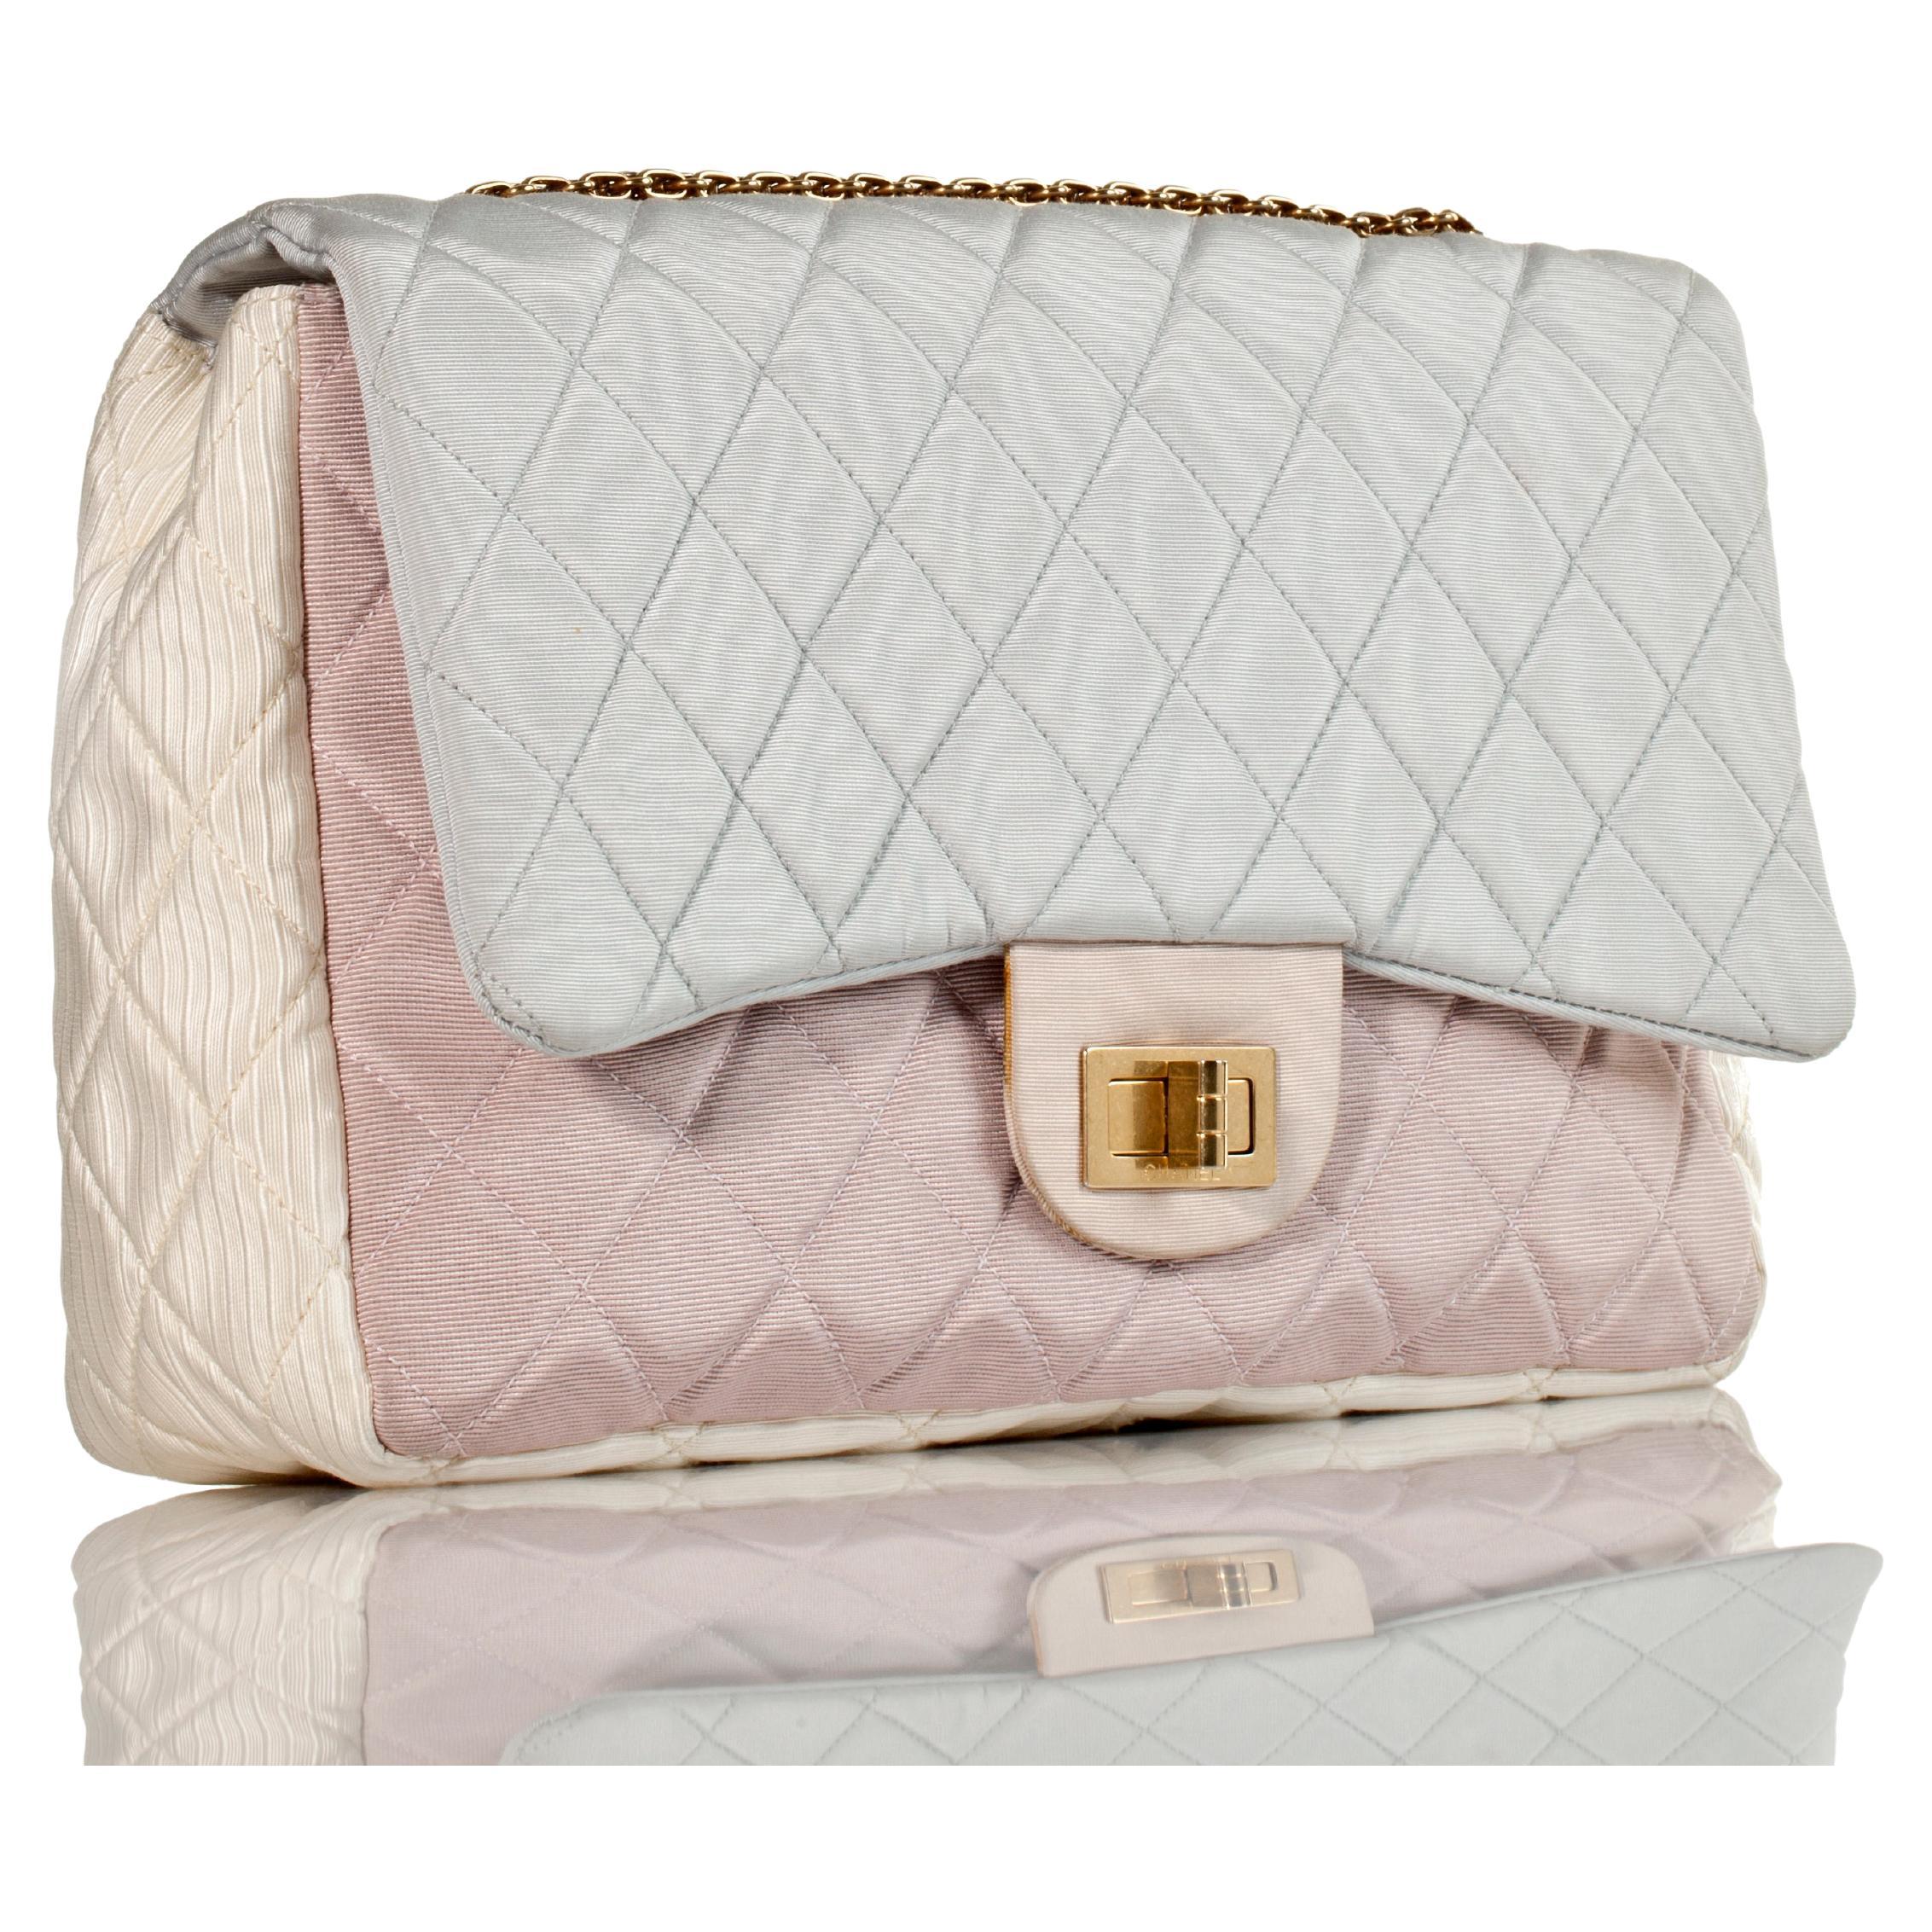 Chanel Resort Pastel Multicolor Satin Nylon Reissue Flap Bag 

2009 {Vintage 15 Years}

Gold bijoux chain
Pastel hues: blue, pink and yellow 
Adjustable shoulder strap and back exterior slip pocket
Ivory fabric interior with one slip and one